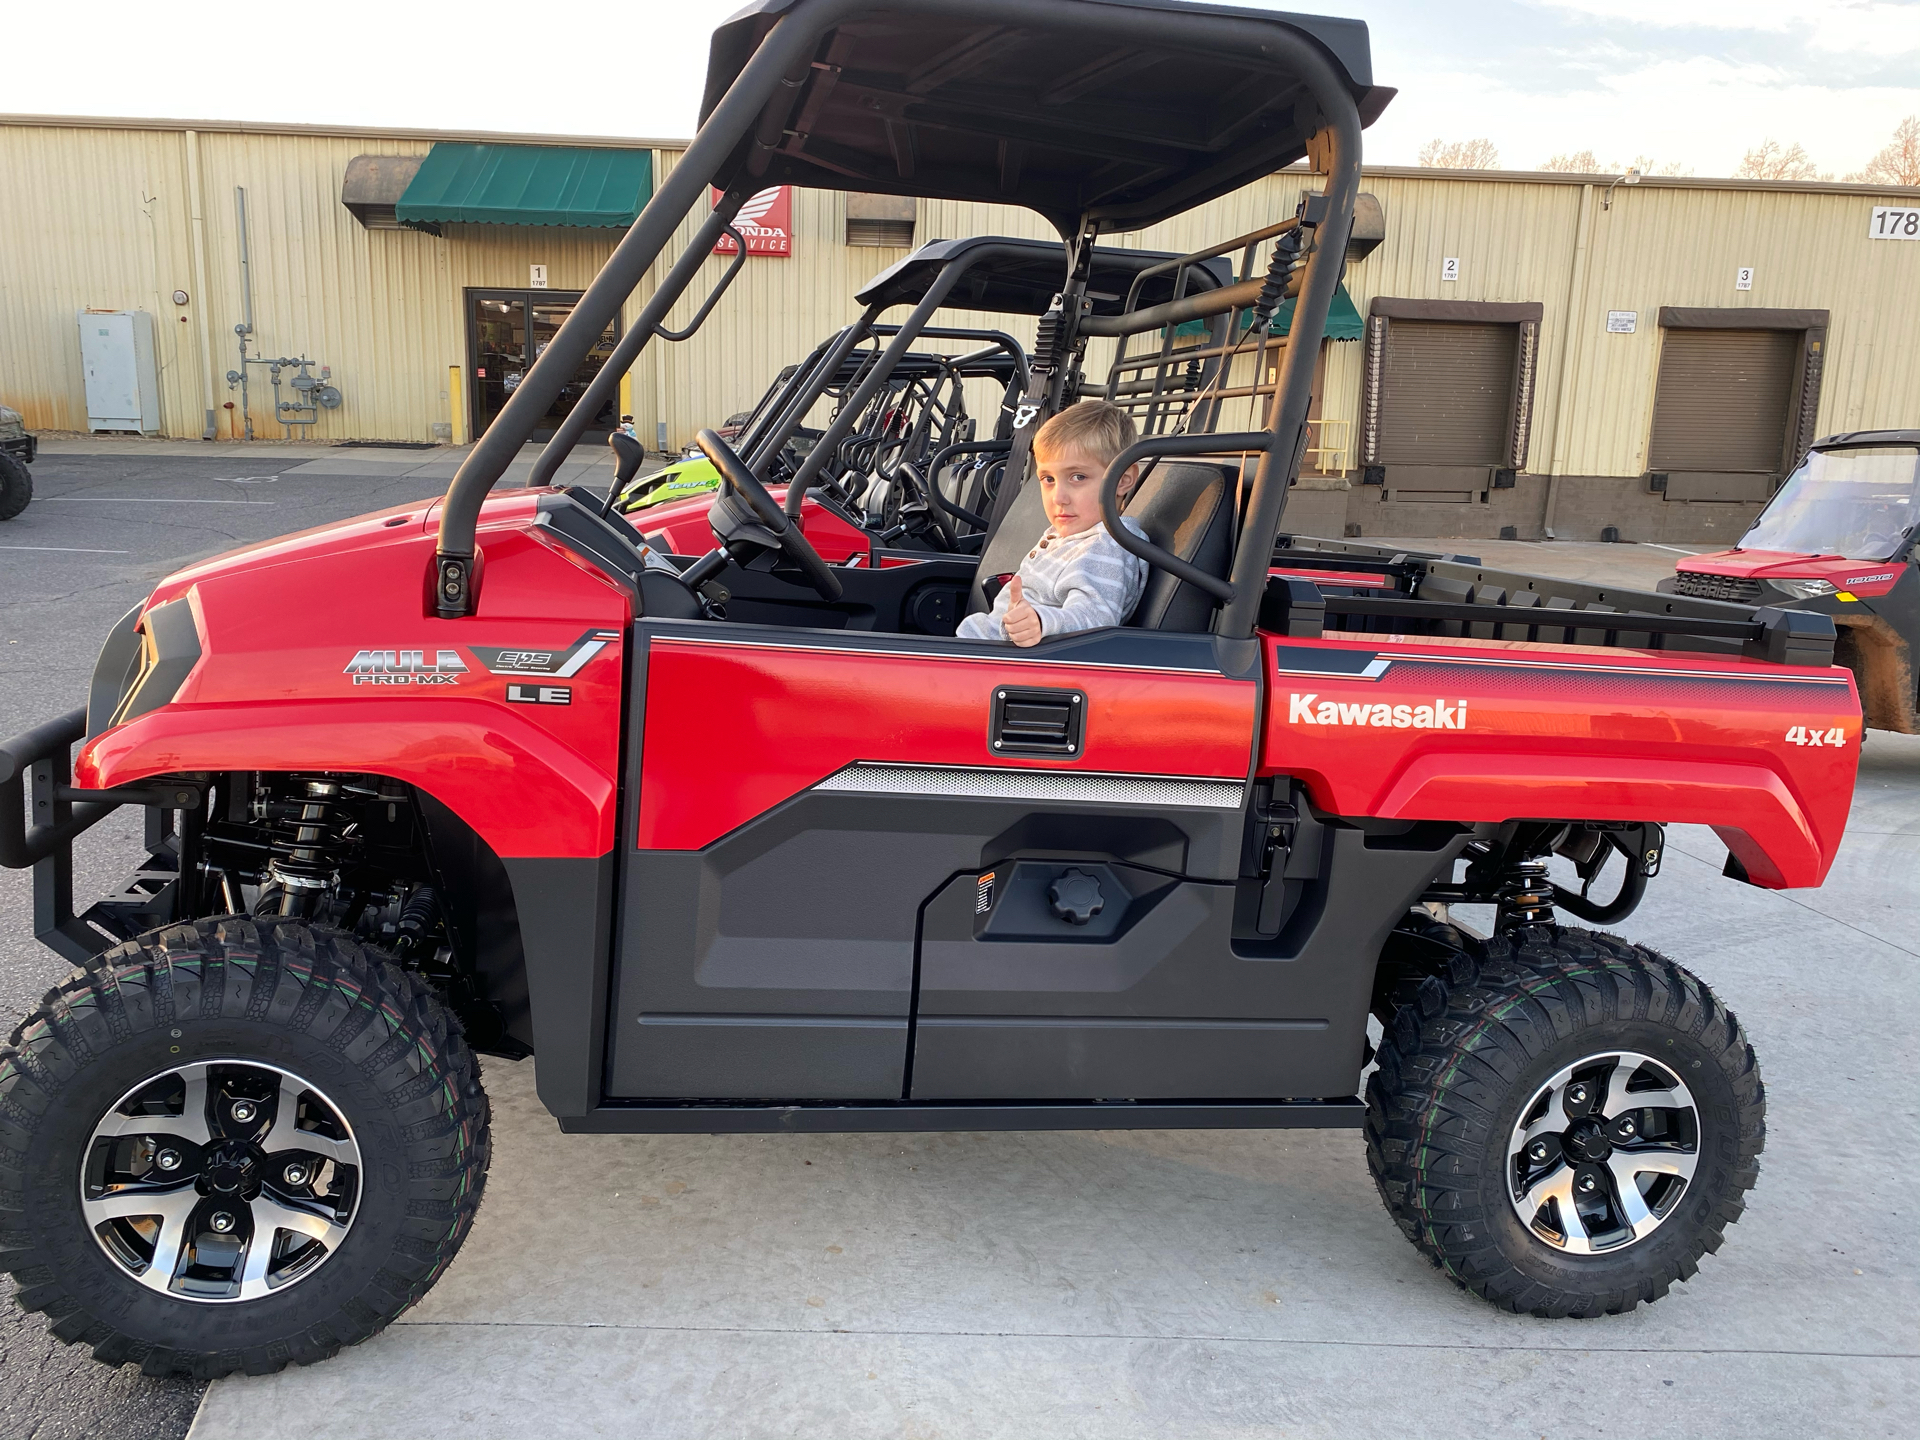 New 2021 Kawasaki Mule PRO-MX EPS LE Utility in Statesville, NC | Stock Number: 550467